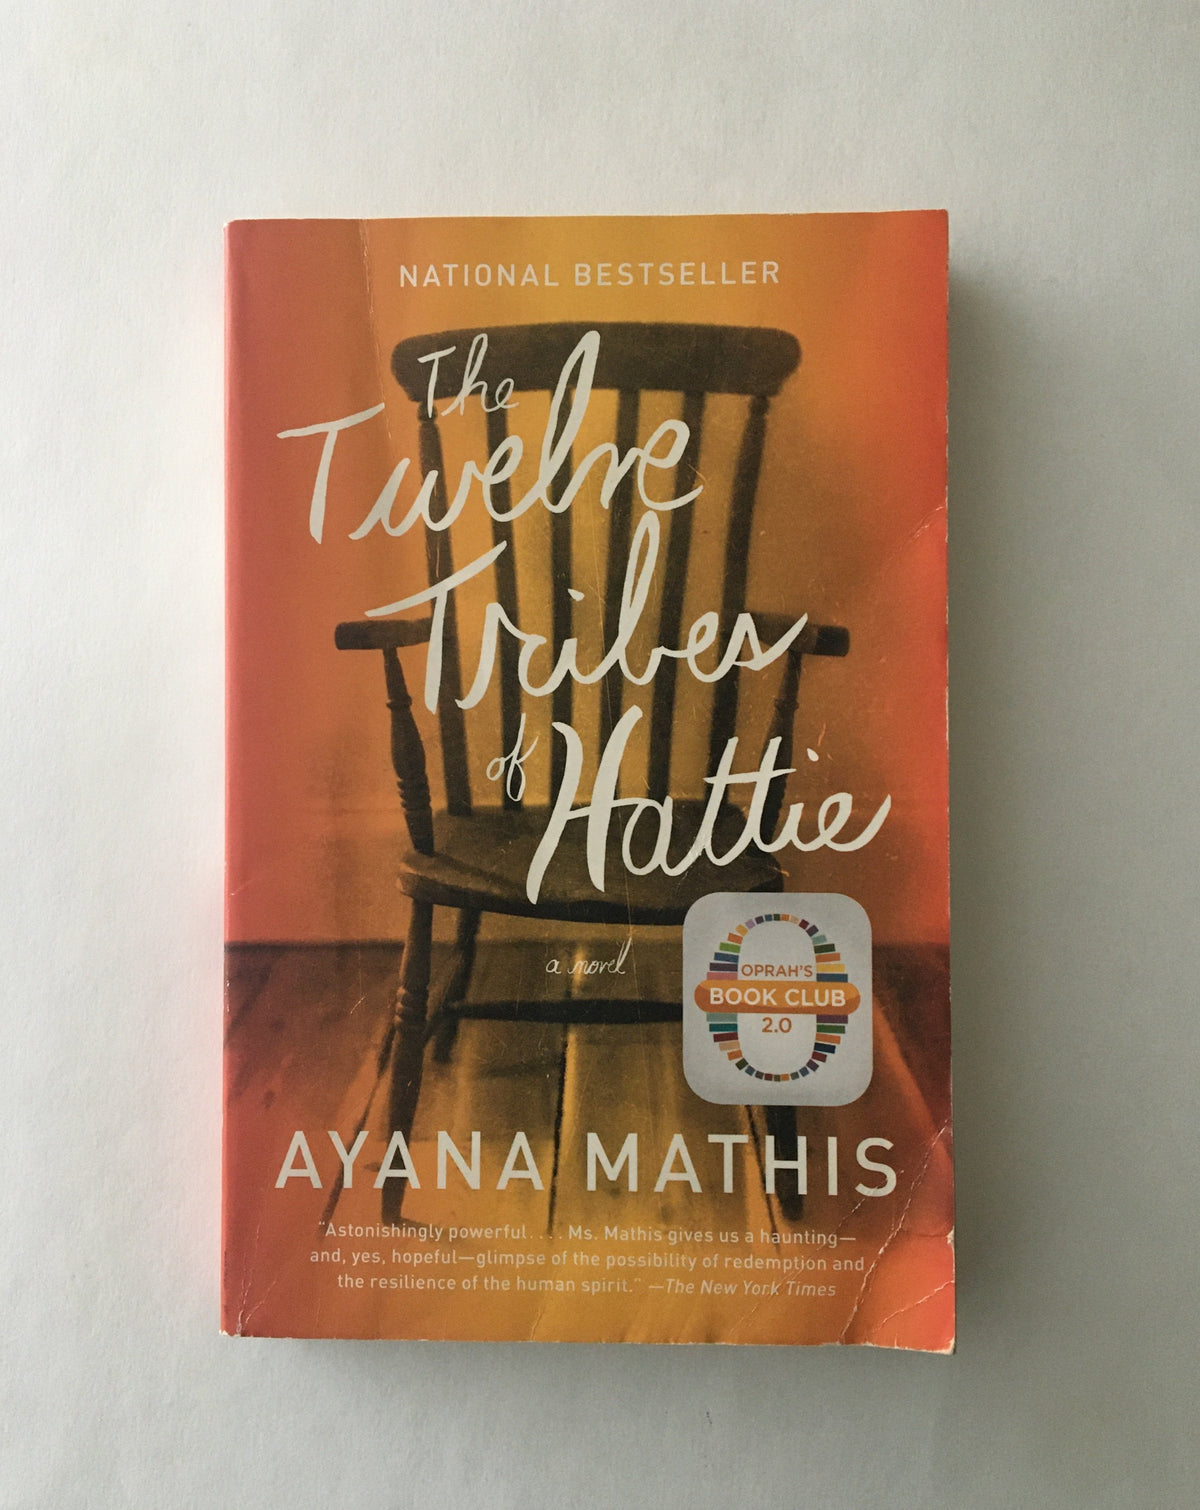 Donate: The Twelve Tribes of Hattie by Ayana Mathis